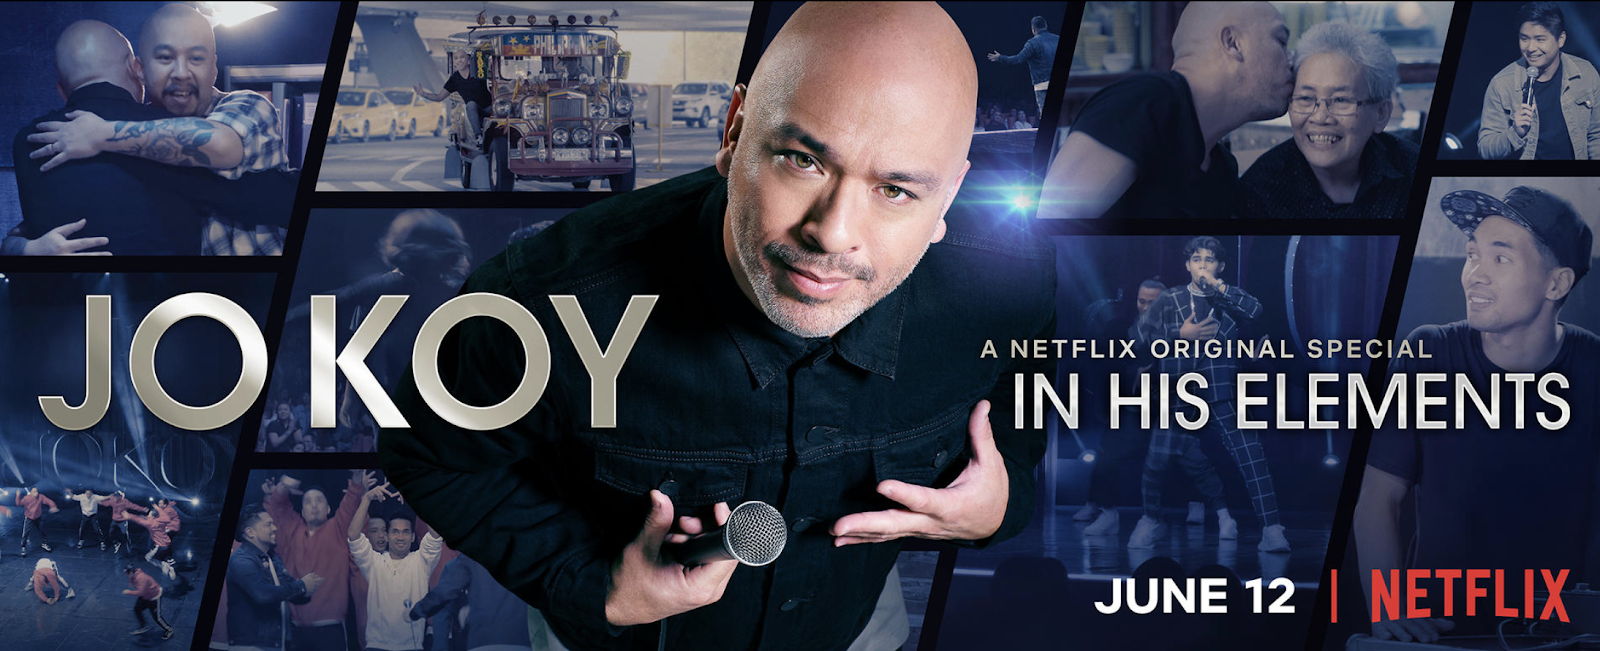 SAVE THE DATE: Netflix Original Special JO KOY: IN HIS ELEMENTS is Coming On June 12, 2020